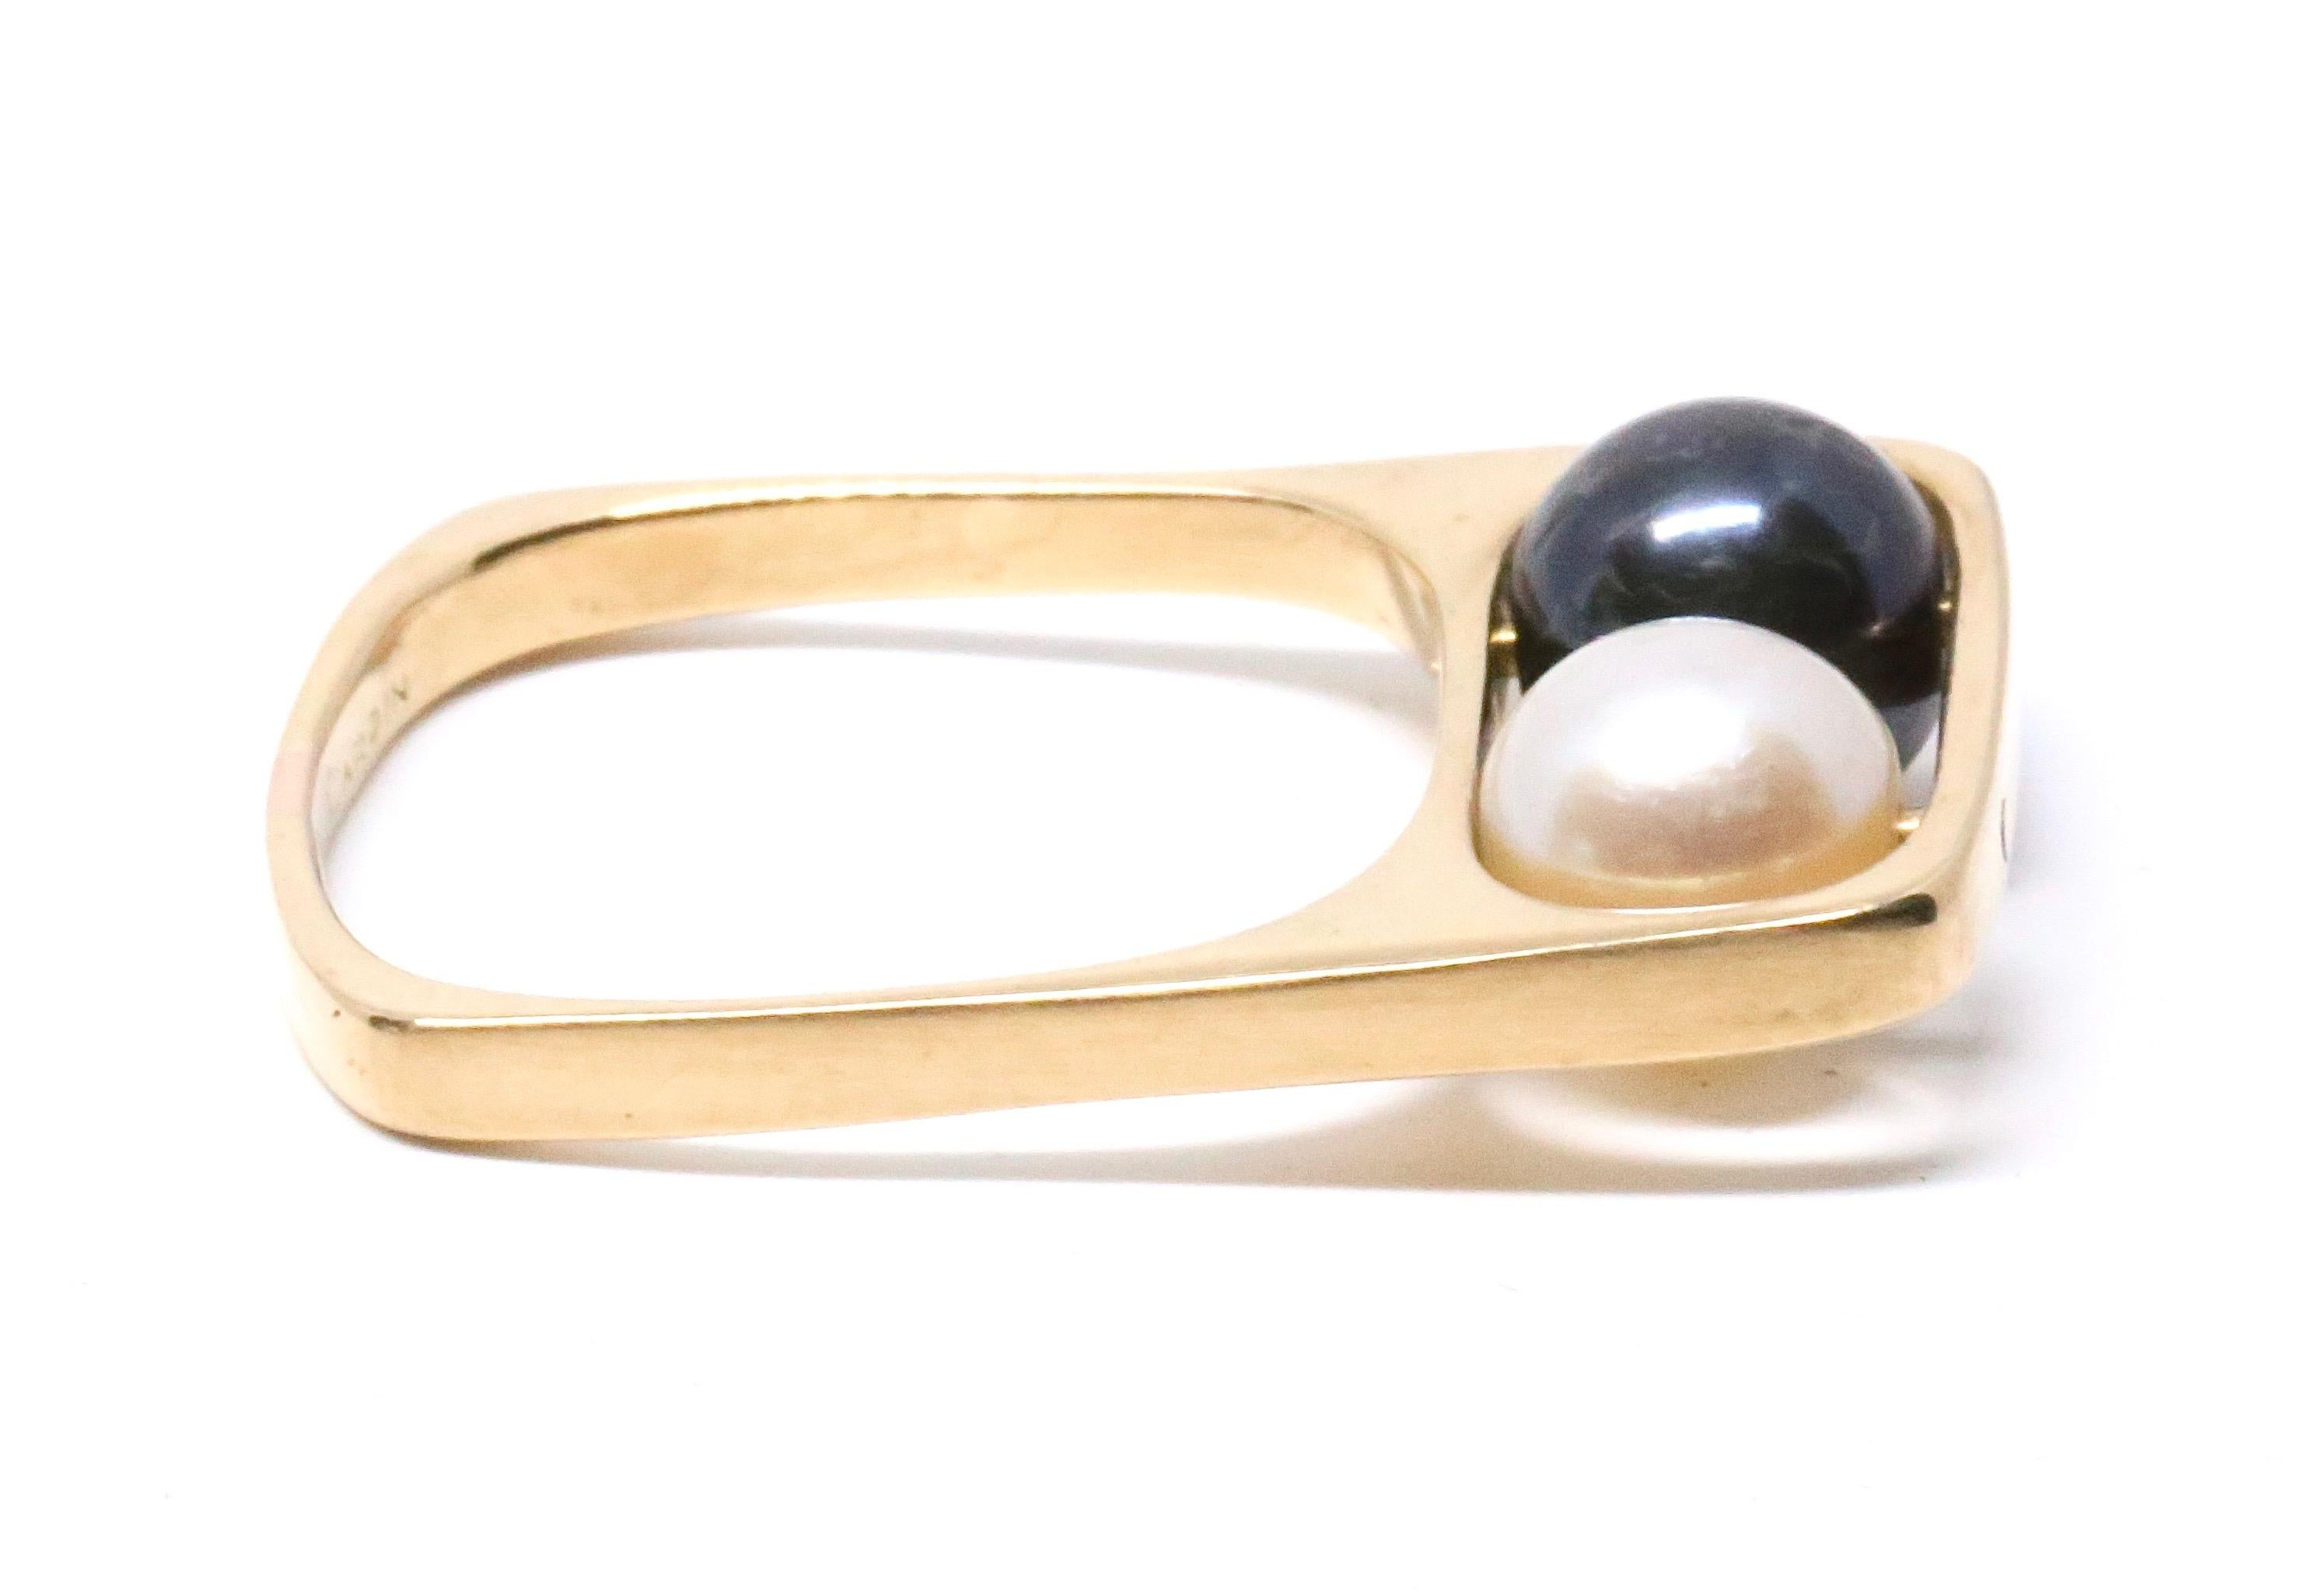 Very rare and important 18k yellow gold ring set with movable pearls designed by Jean Dinh Van for Pierre Cardin dating to the 1960's. The design features a squared shank with an open which encloses two 7.0mm pearls. The pearls are drilled and